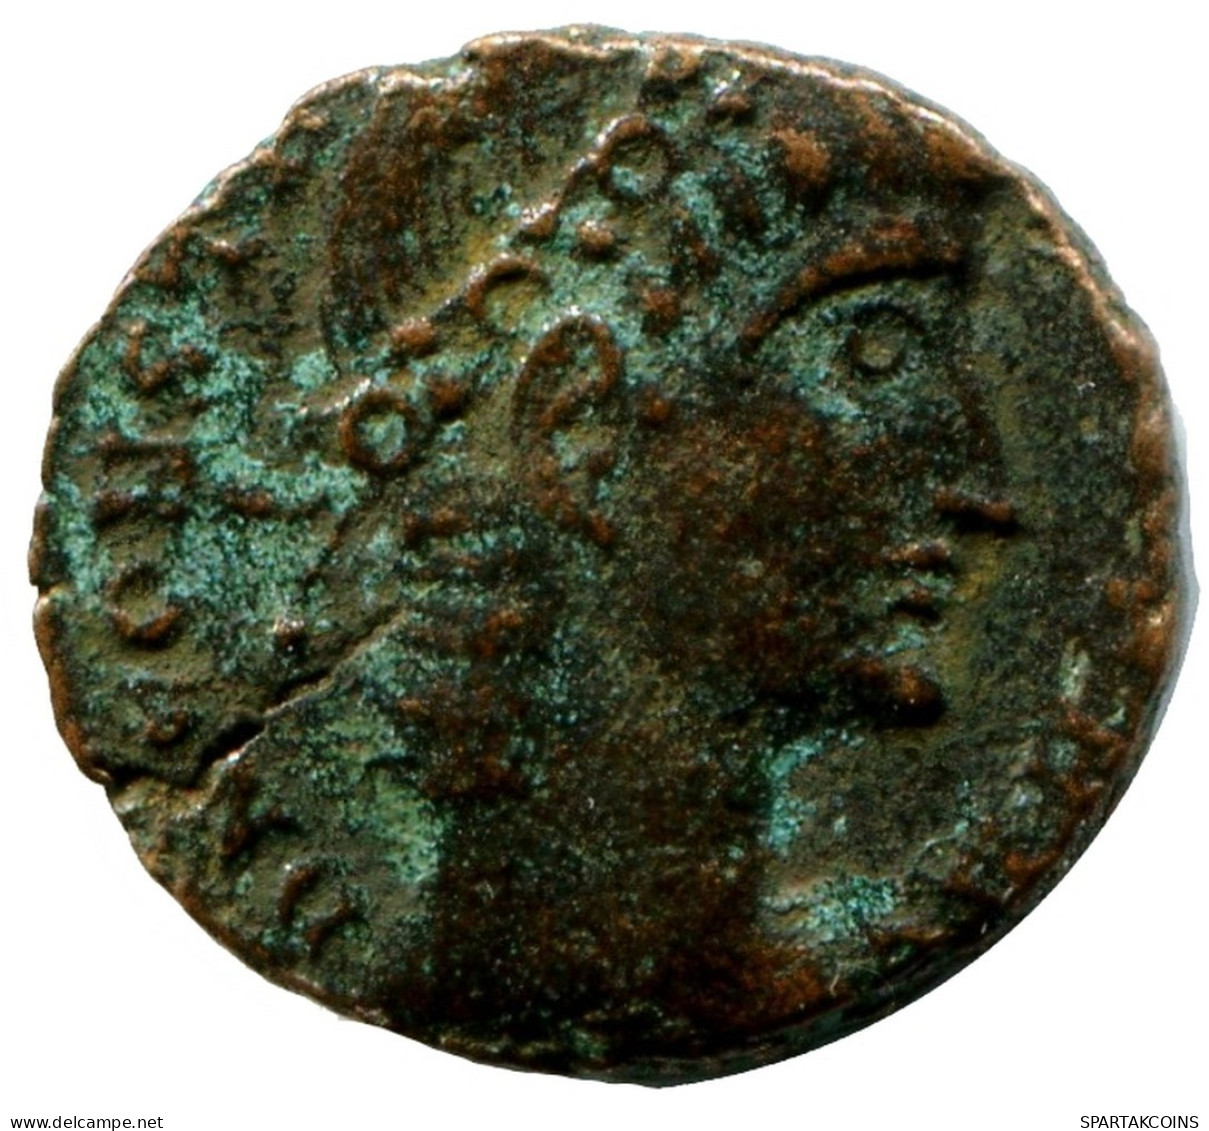 CONSTANS MINTED IN HERACLEA FOUND IN IHNASYAH HOARD EGYPT #ANC11556.14.D.A - The Christian Empire (307 AD To 363 AD)